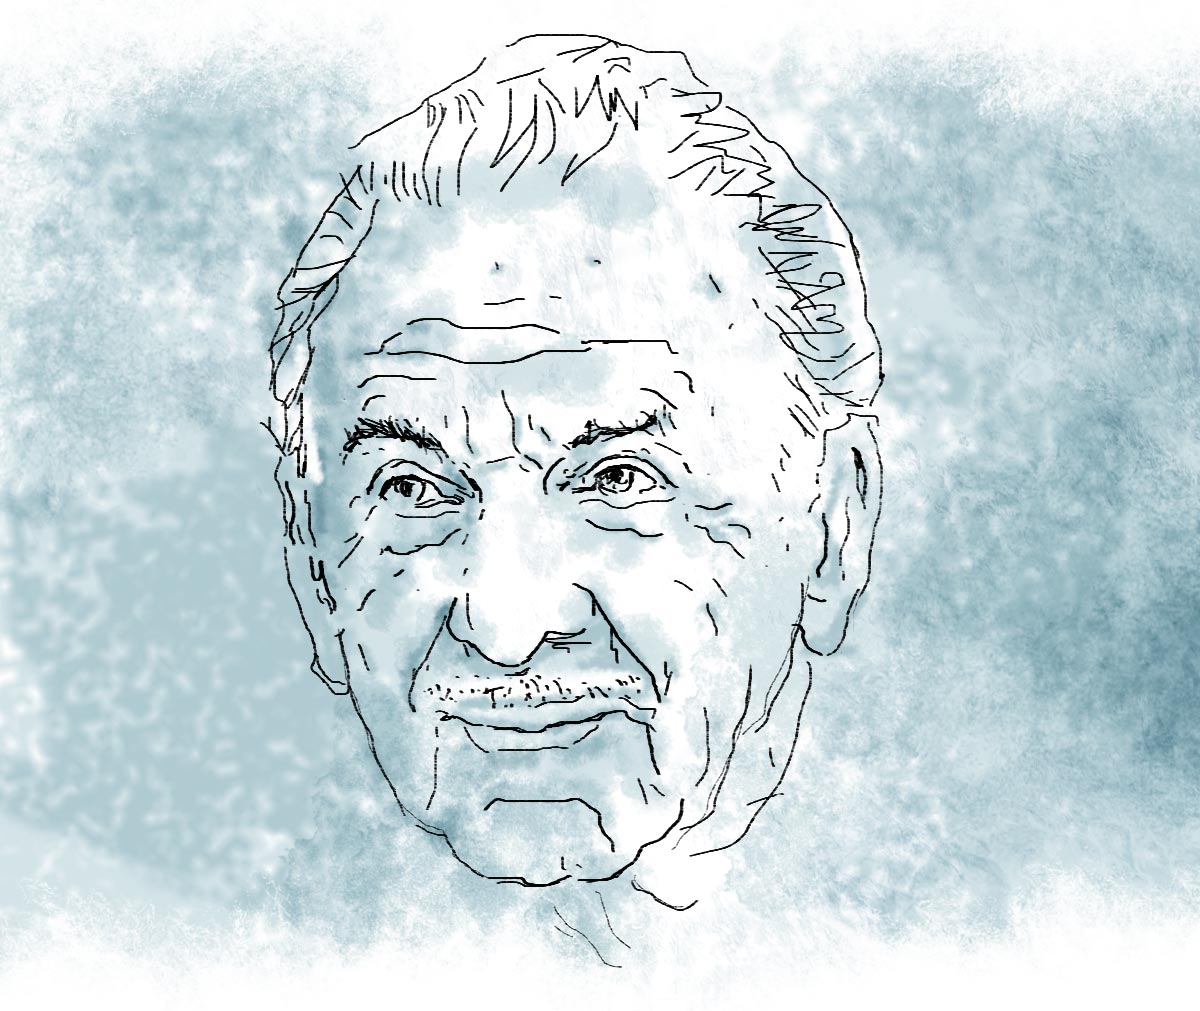 J R D Tata and the birth of Infosys